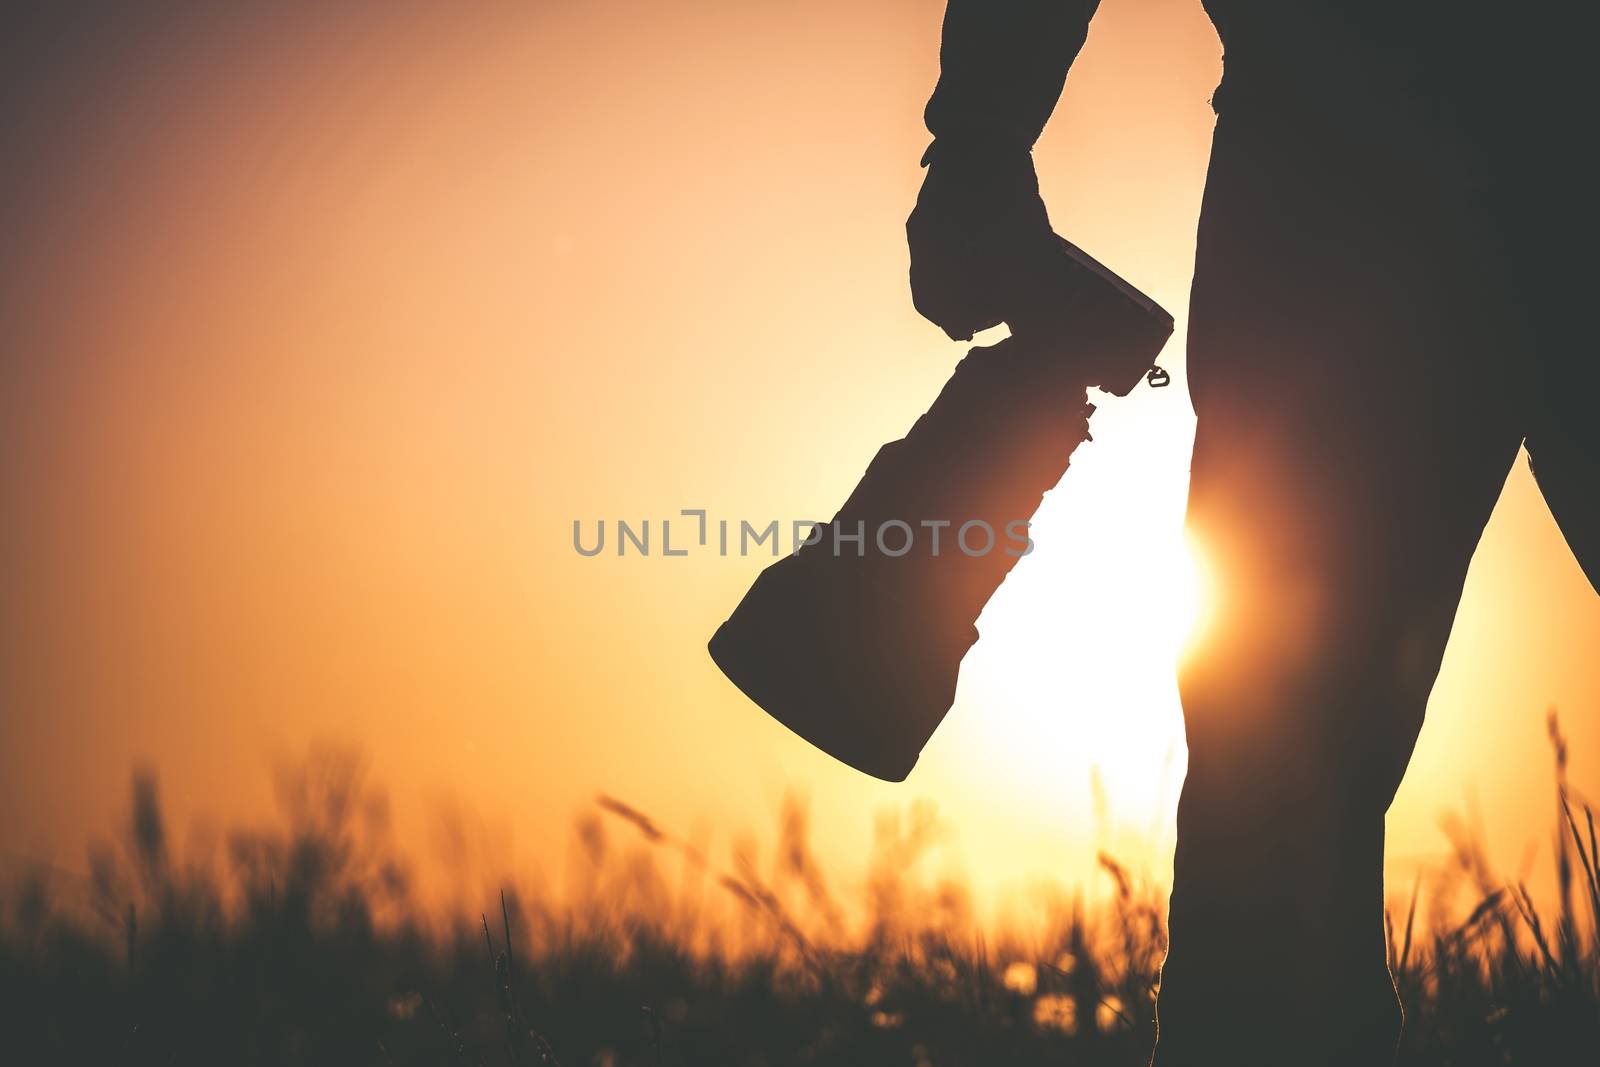 Safari Outdoor Photographer at Sunset. Silhouette of Men Keeping Digital Camera in Hand with Large Telephoto Lens For the Better Wildlife Closeups.